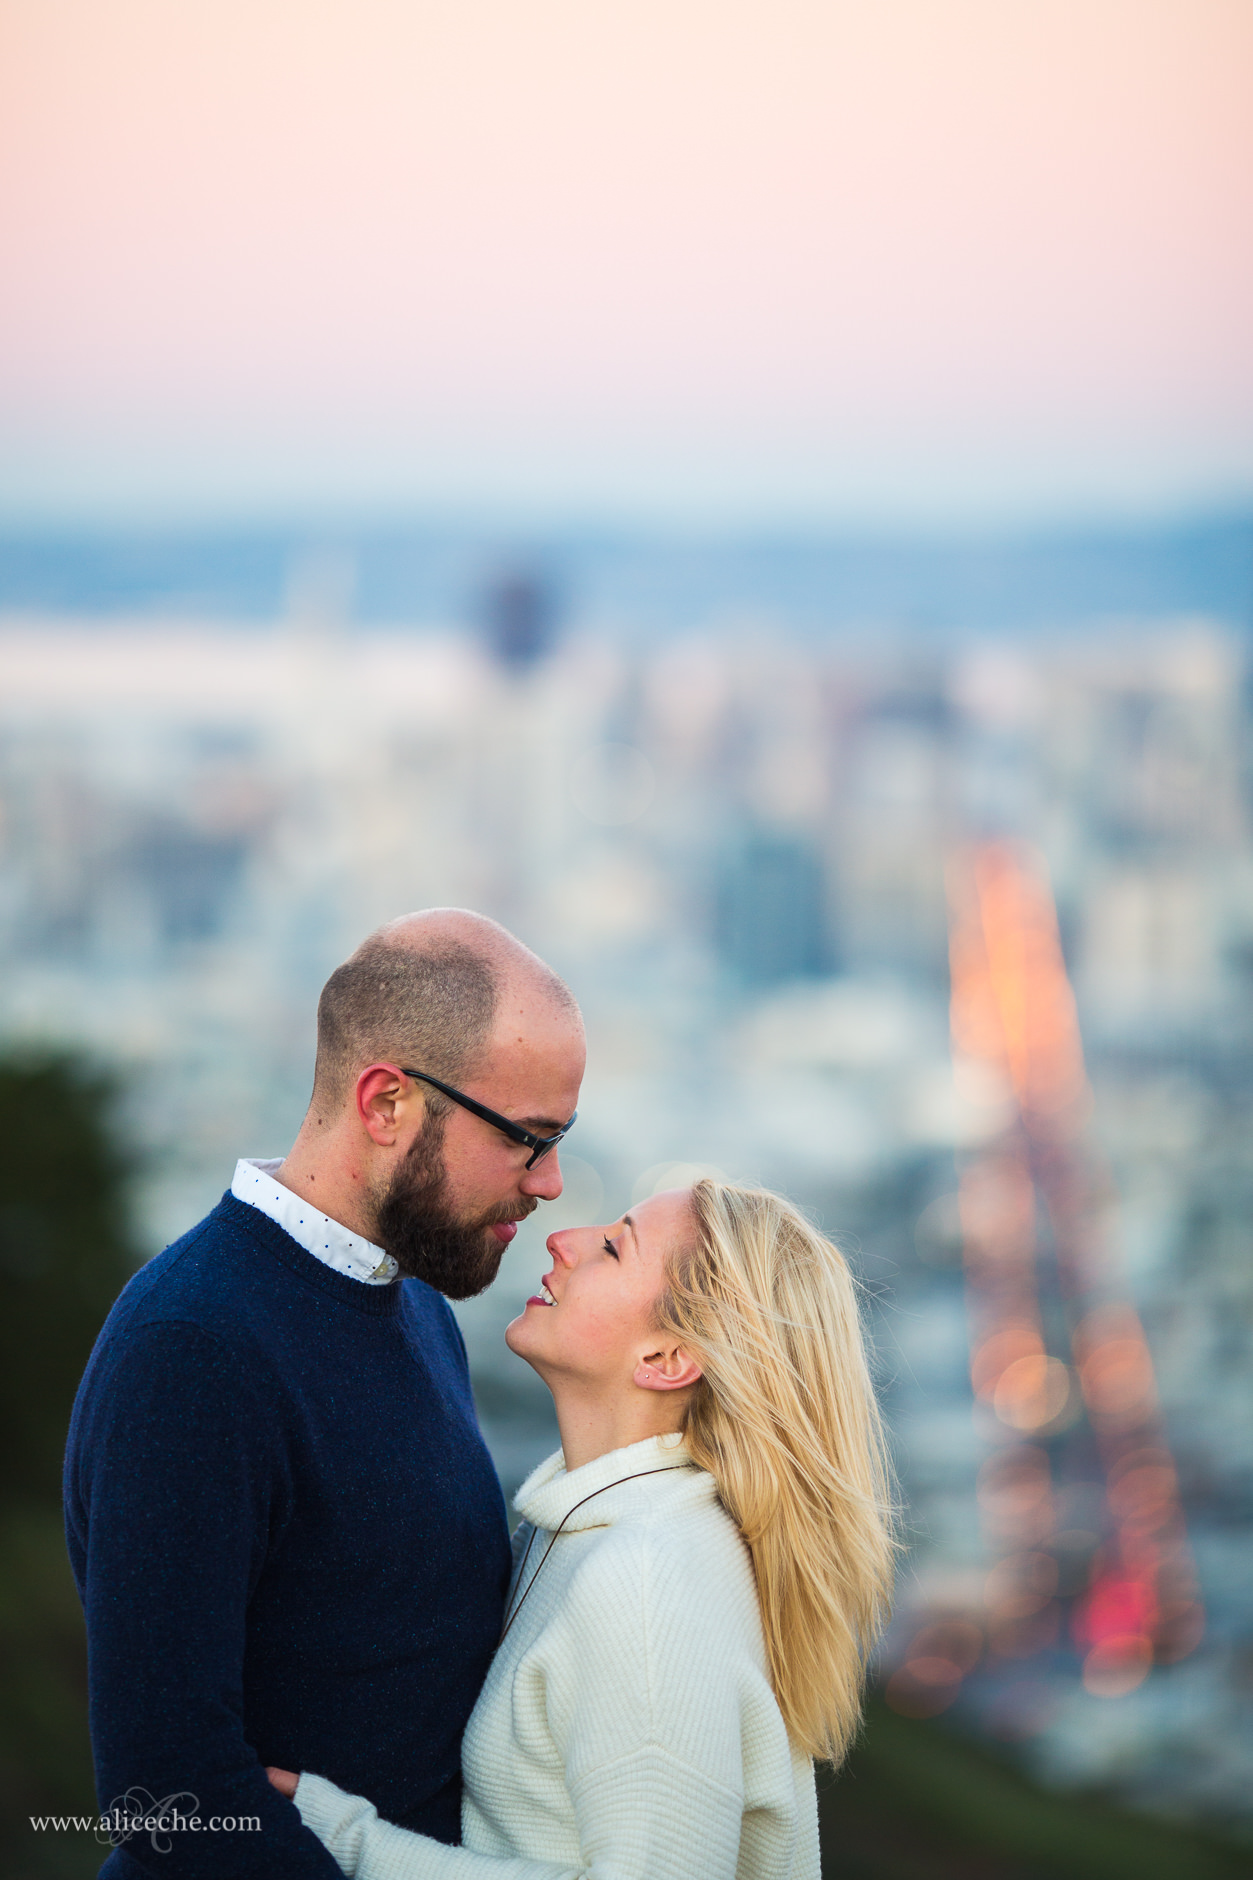 Twin Peaks Engagement Session San Francisco Photographer Gorgeous Couple at Sunset Above City Lights